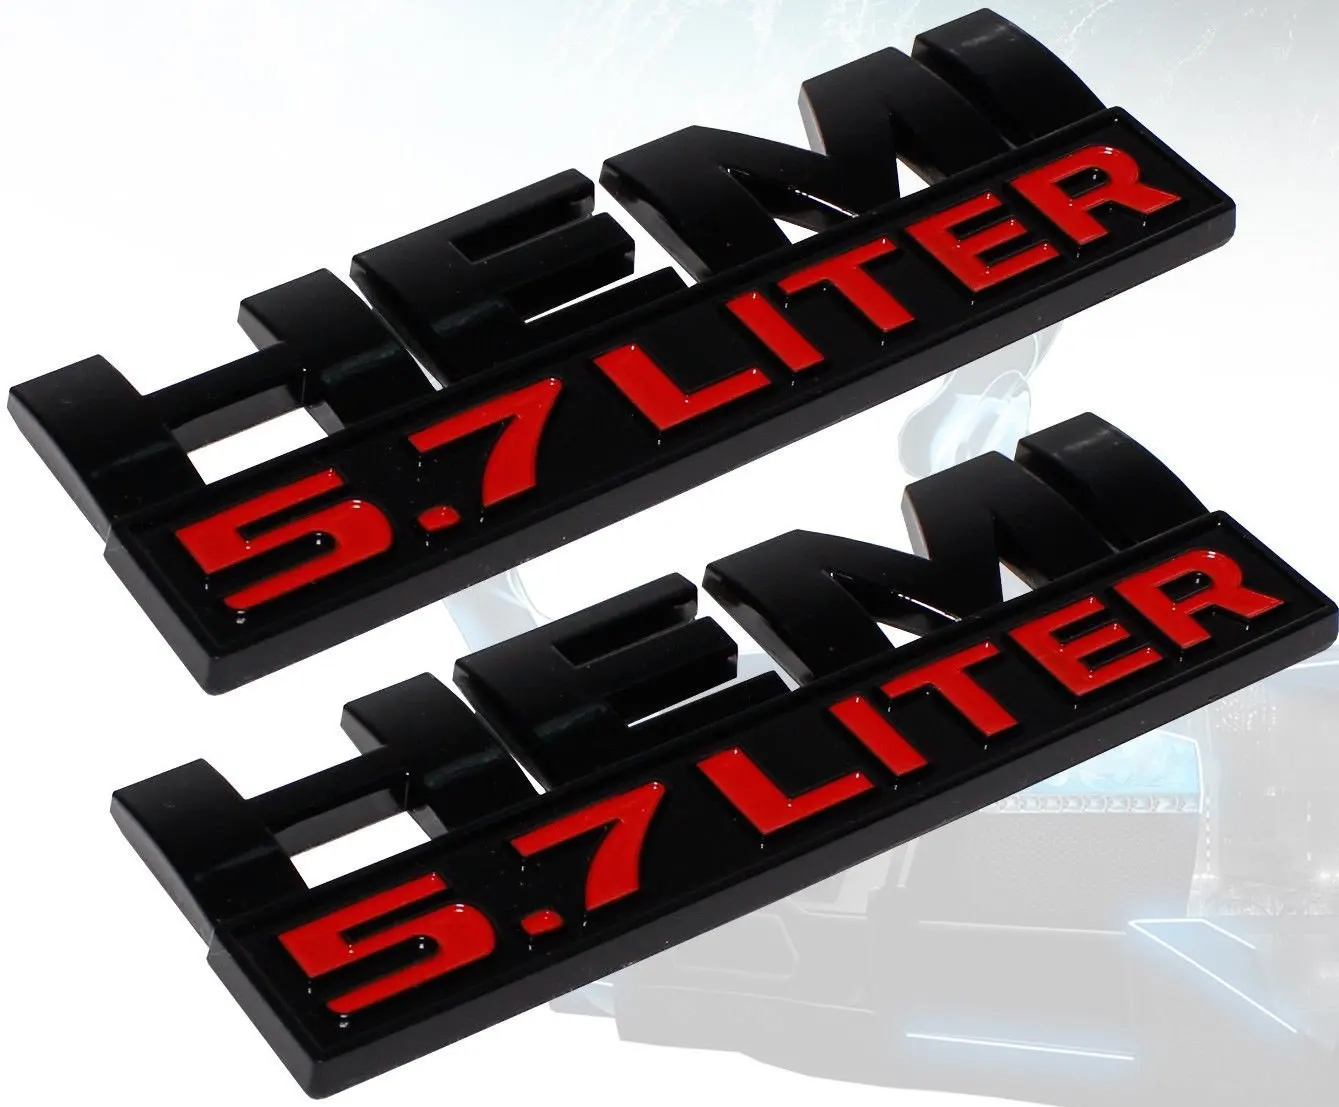 Muzzys (Set of TWO) Hemi 5.7L Black and Red Emblems for Dodge Ram 1500 2500...